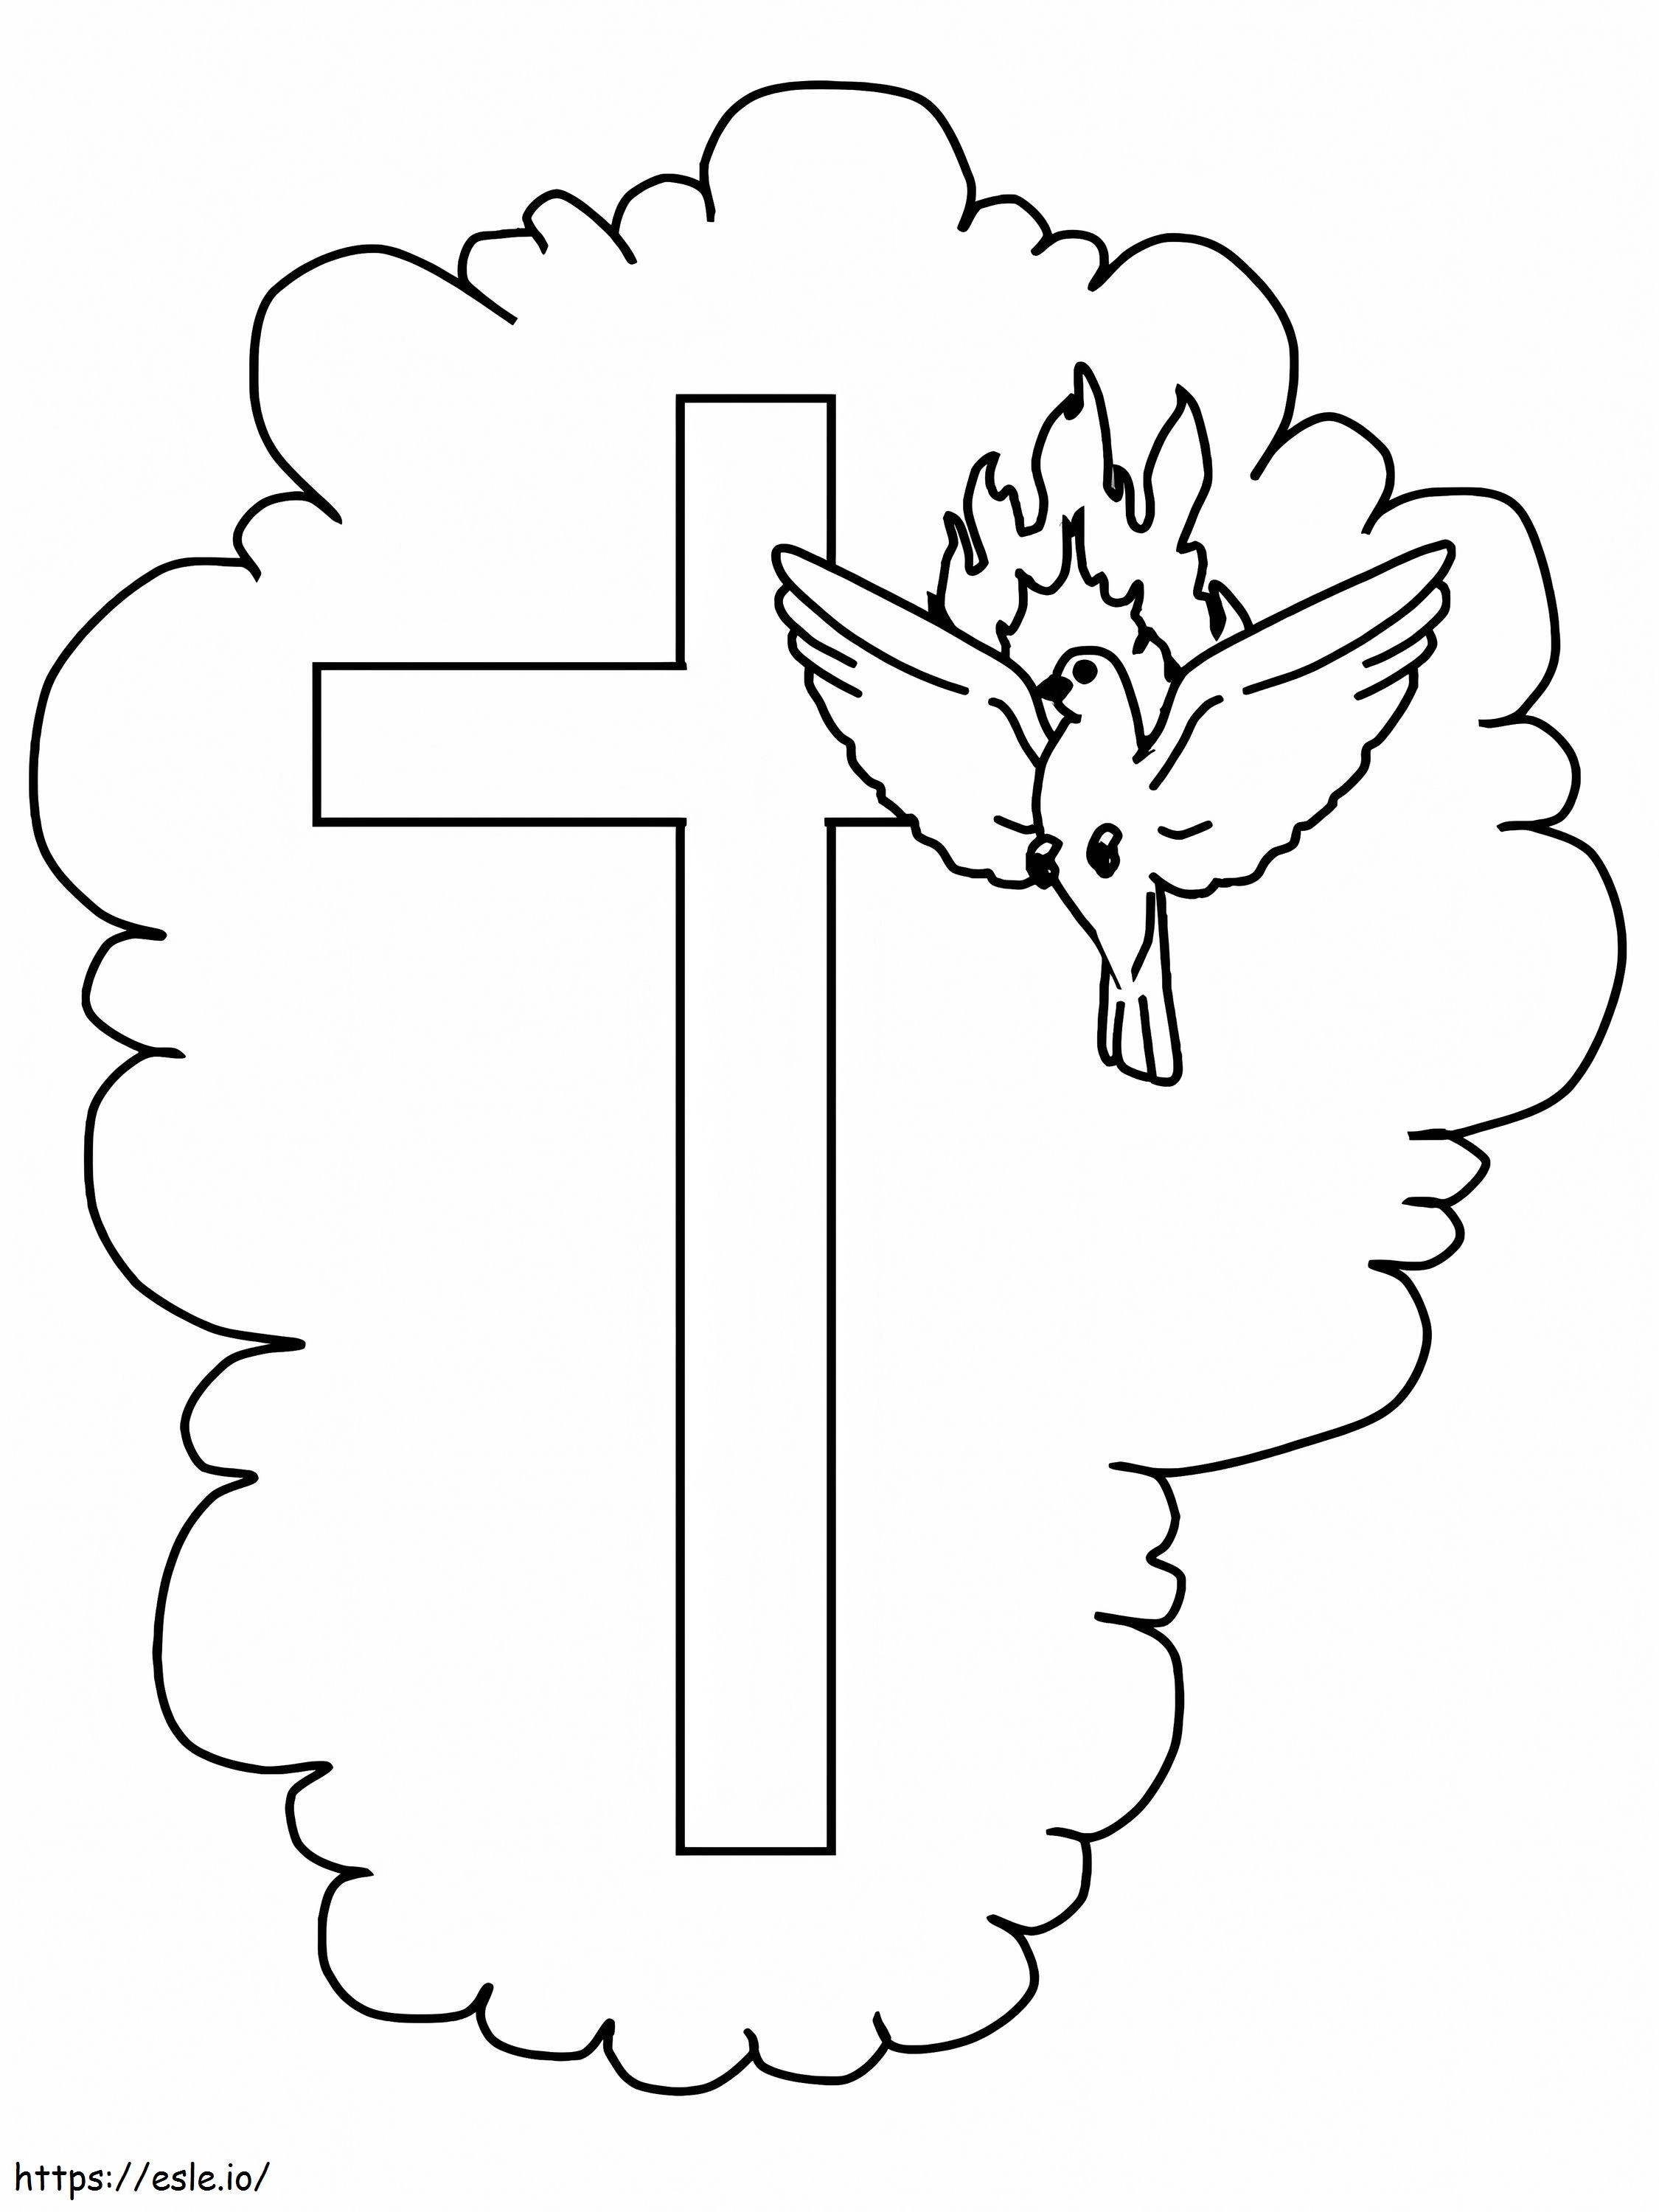 The Holy Spirit 4 coloring page